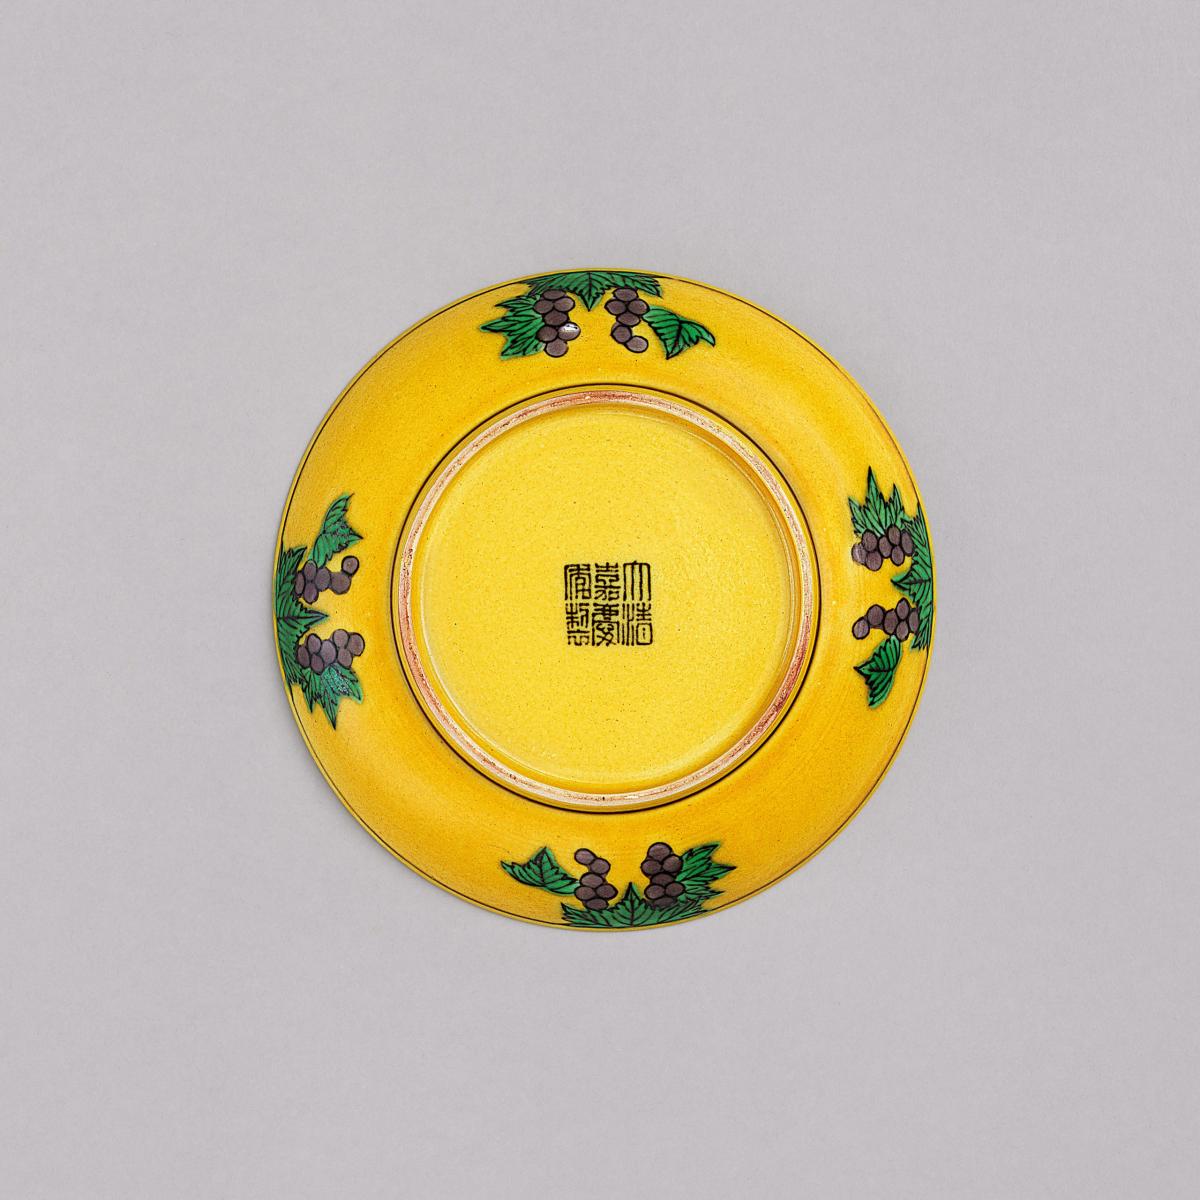 Chinese imperial porcelain saucer dish, 1796-1820